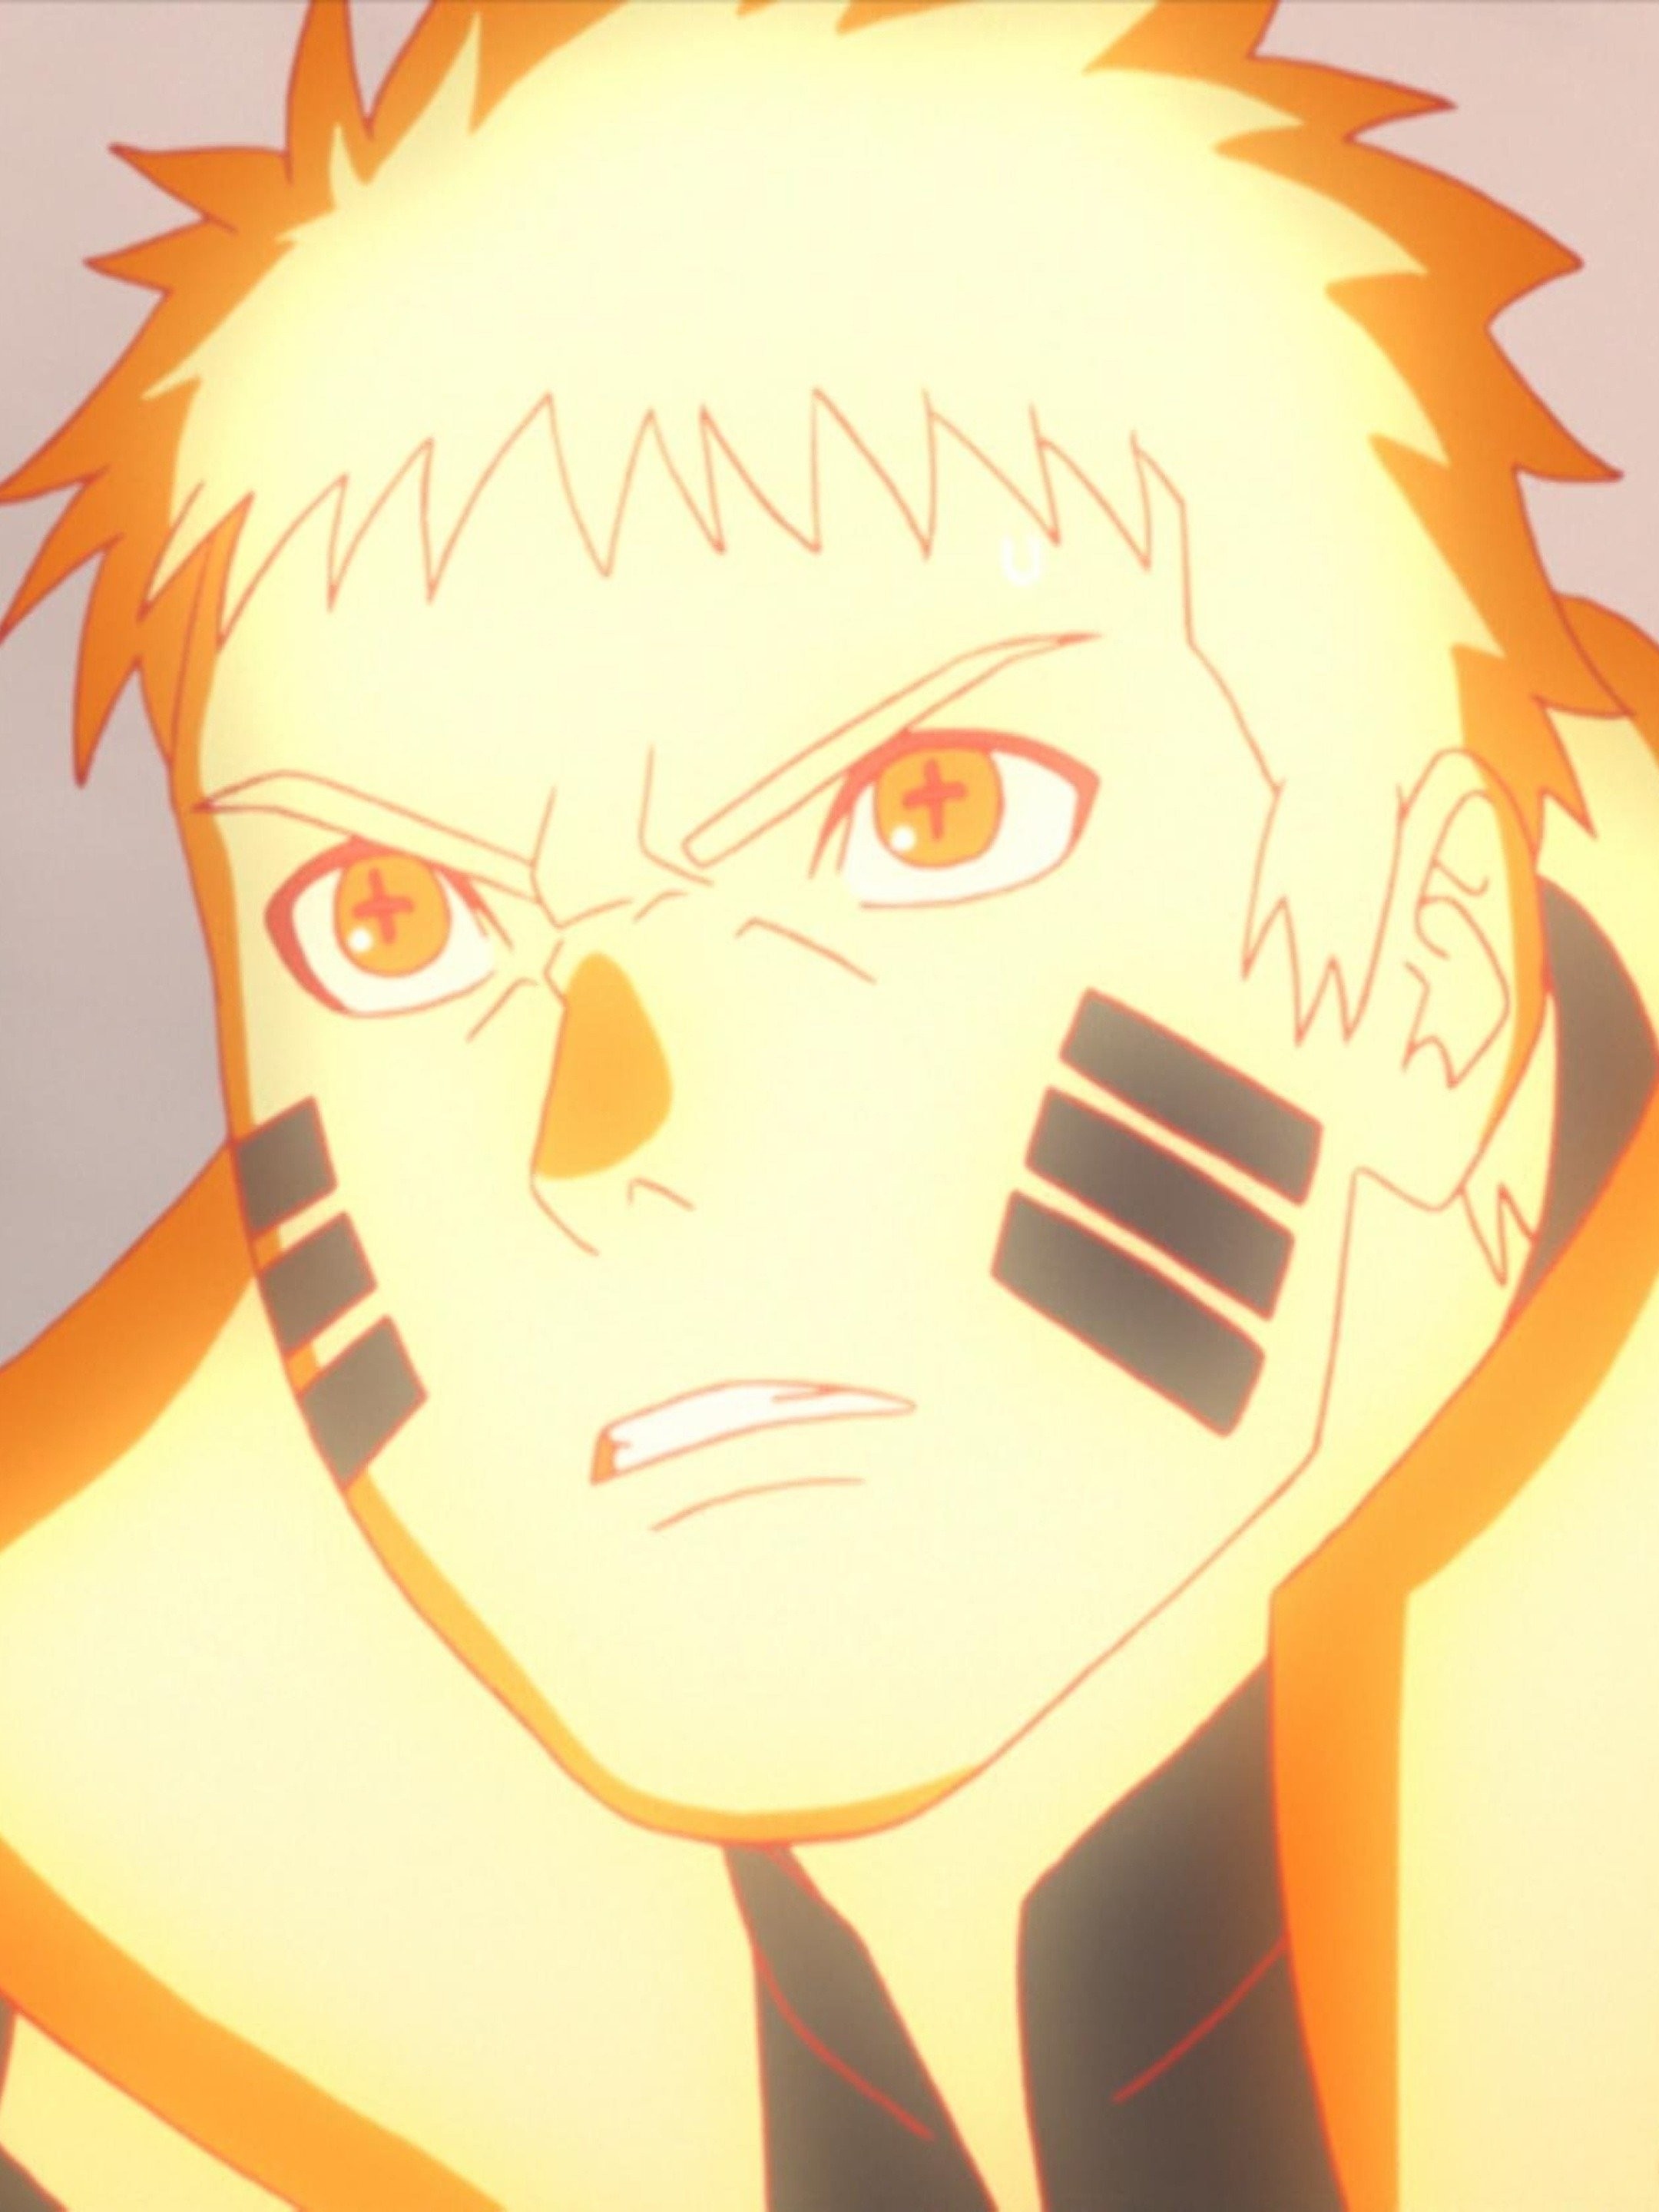 Boruto episode 288: Release date, where to watch, what to expect